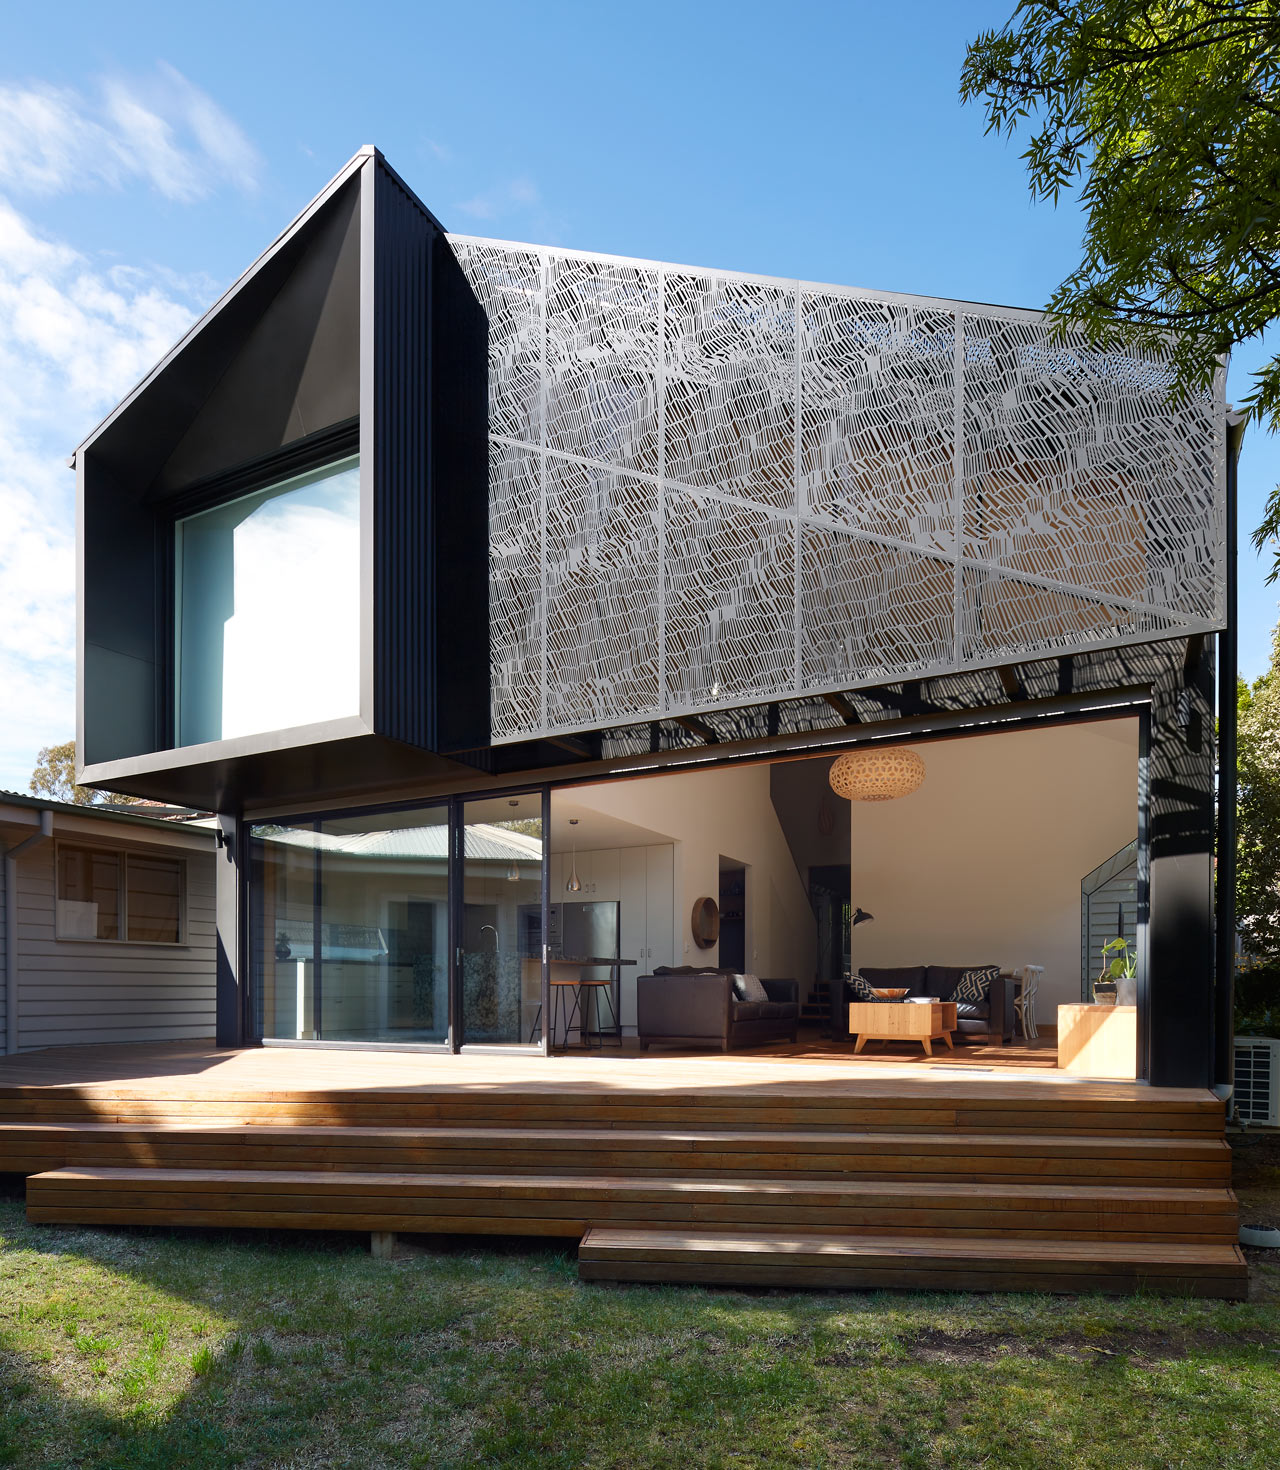 This gorgeous contemporary house addition was done with pretty geometry and a cool screen inspired by textiles, it's used to prevent excessive sunshine in